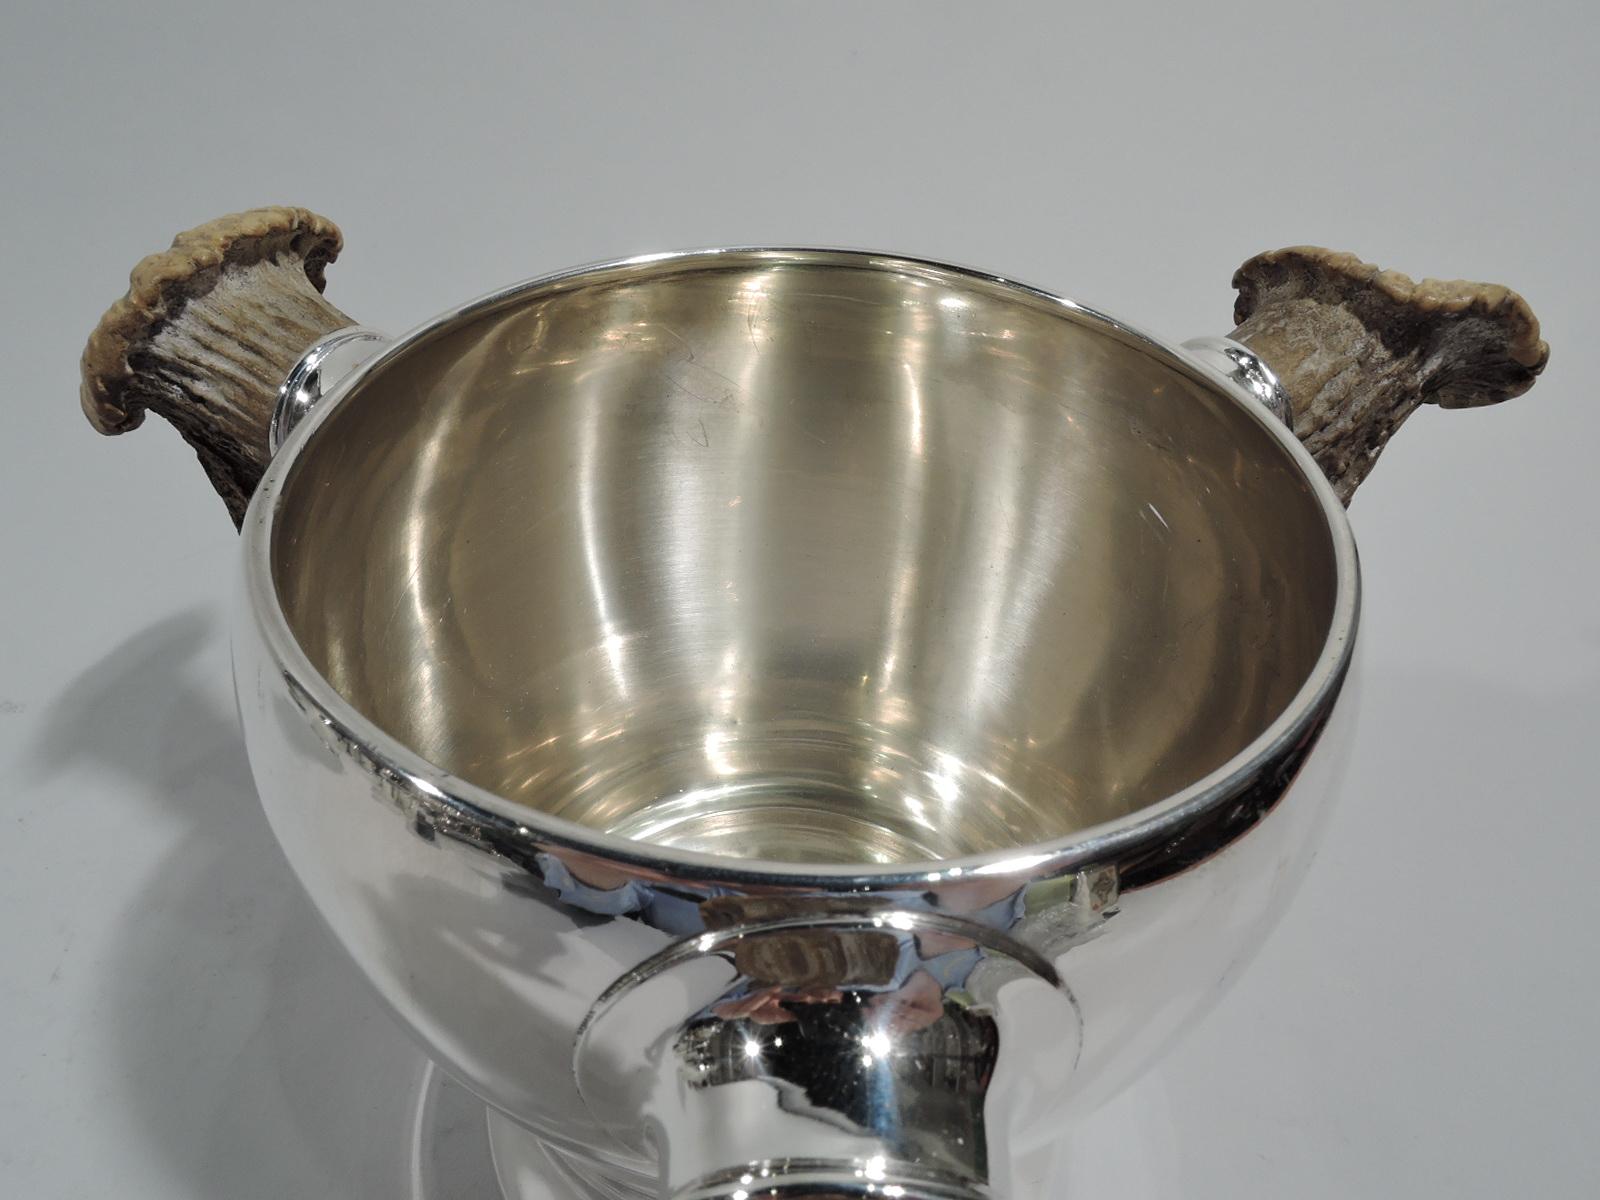 Turn-of-the-century sterling silver loving cup. Made by Gorham in Providence. Voluptuous baluster with 3 silver-mounted antler handles. A big game-era trophy for an alpha winner. Lots of room for engraving a bold and forthright presentation. Holds